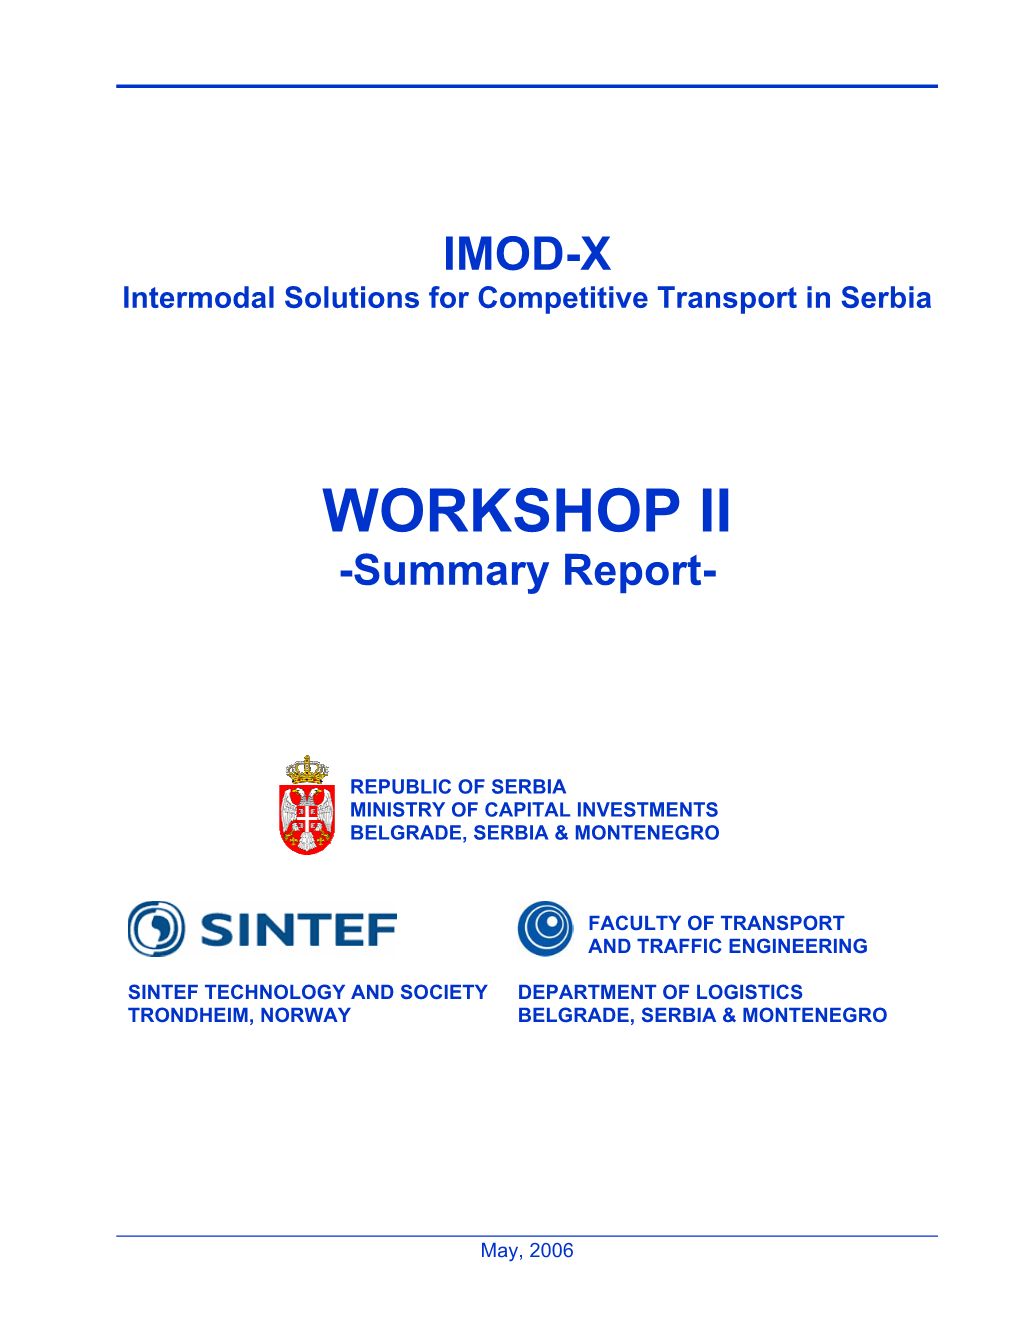 IMOD-X Project on 09 March 2006 at the Faculty of Transport and Traffic Engineering in Belgrade, Serbia